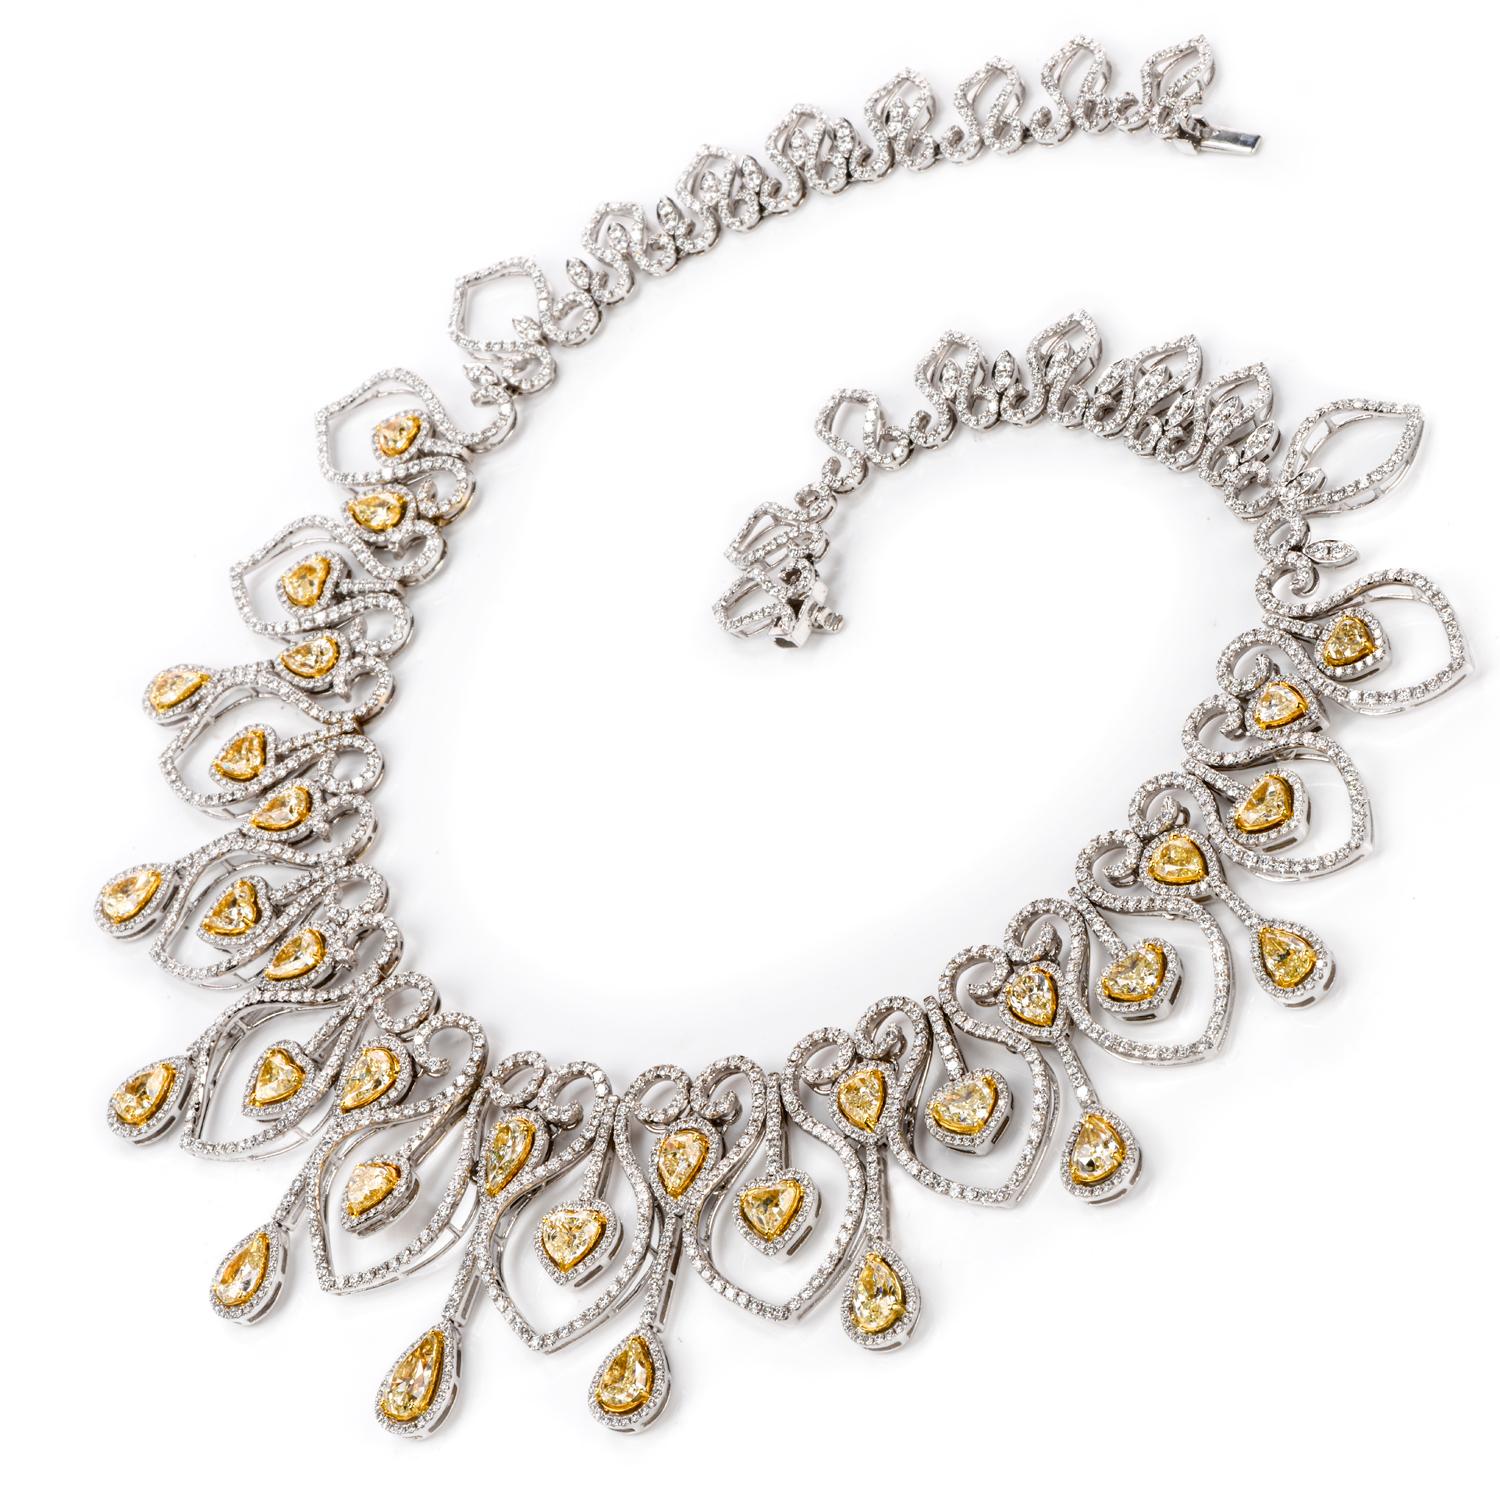 MAKE YOUR STATEMENT with this opulent, chandelier inspired

16.5 inch choker necklace.

Featuring 12 heart shaped natural yellow Diamonds and 20 pear shaped yellow Diamonds

accenting throughout a sea of approximately 2503 icy white round faceted